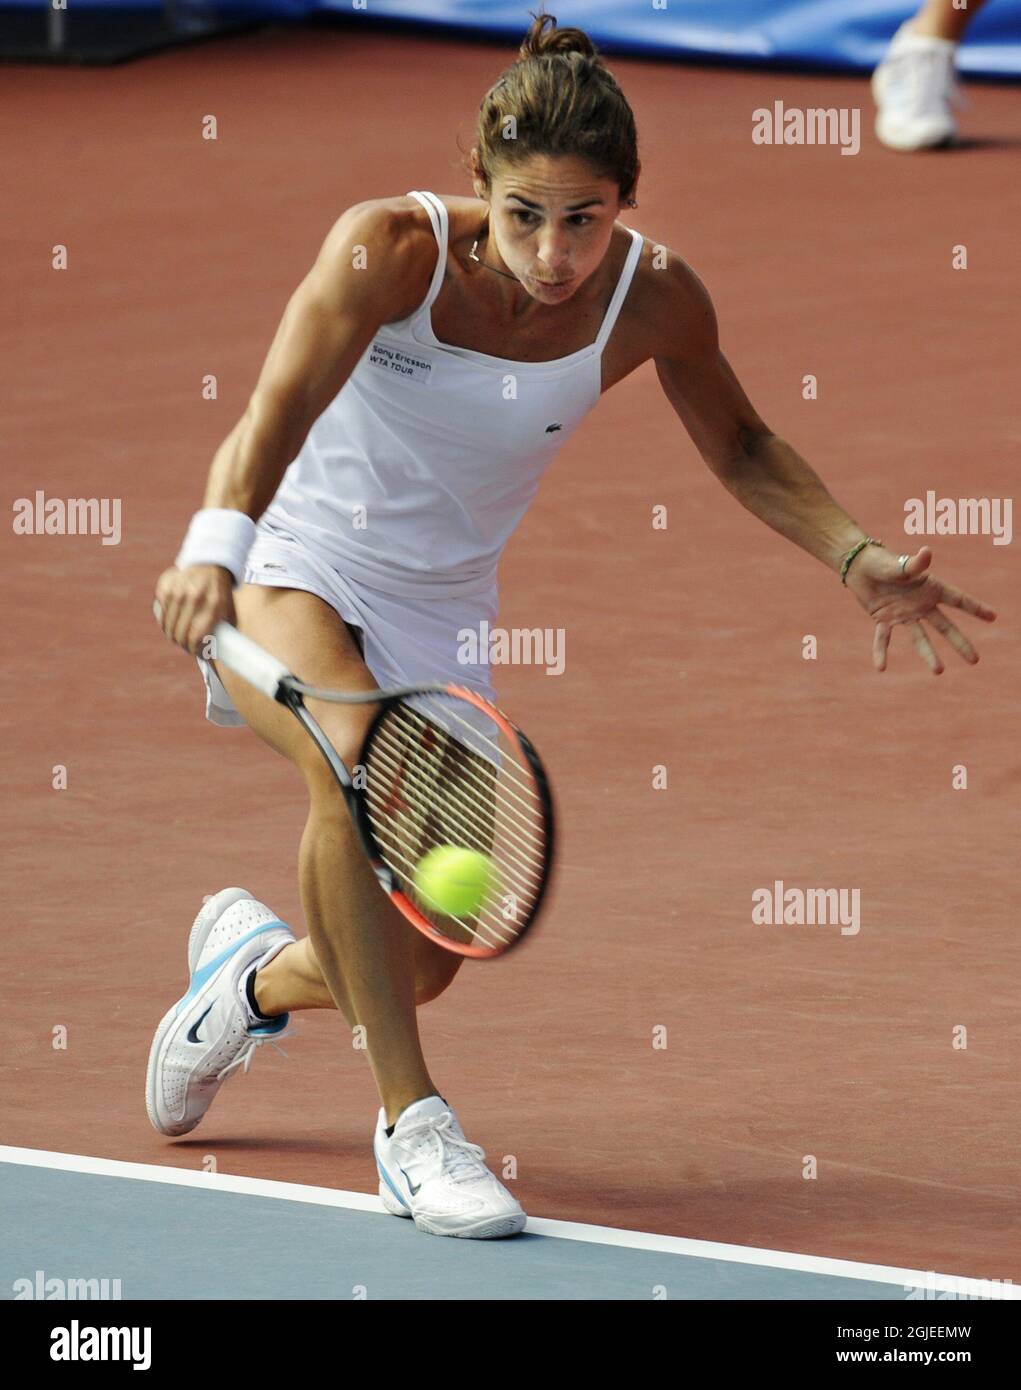 Virginia Ruano Pascual (ESP) in action during her quarter finals against Katarina Srebotnik (SLO) at the Nordic Light Open WTA tennis tournament in Stockholm. Stock Photo